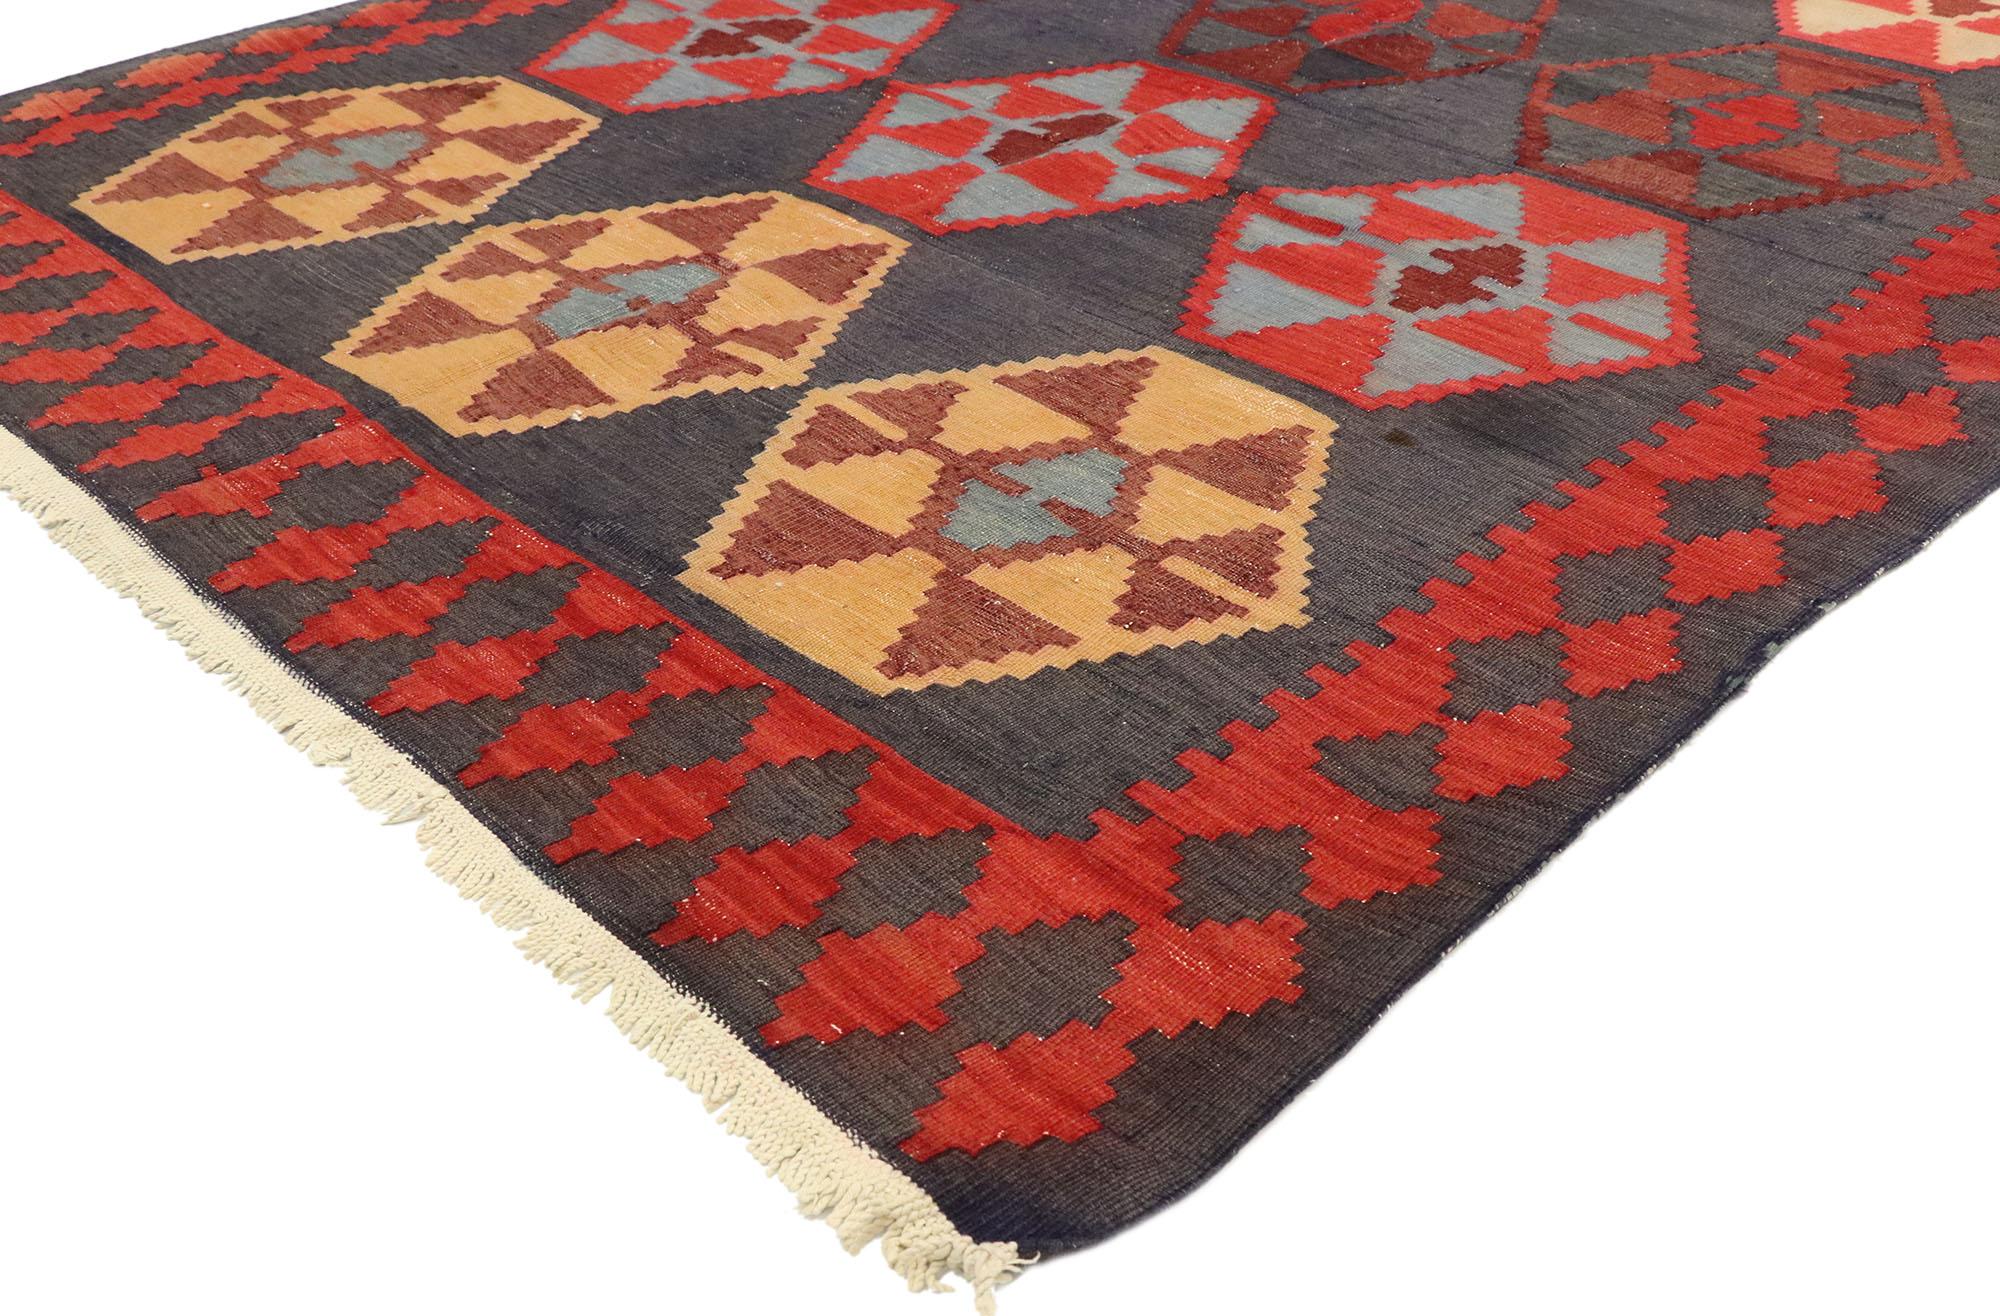 70559, vintage Persian Shiraz Kilim rug with Modern Northwestern Tribal style 04'06 x 10'06. With its bold expressive design, incredible detail and texture, this handwoven wool vintage Persian Shiraz Kilim rug is a captivating vision of woven beauty